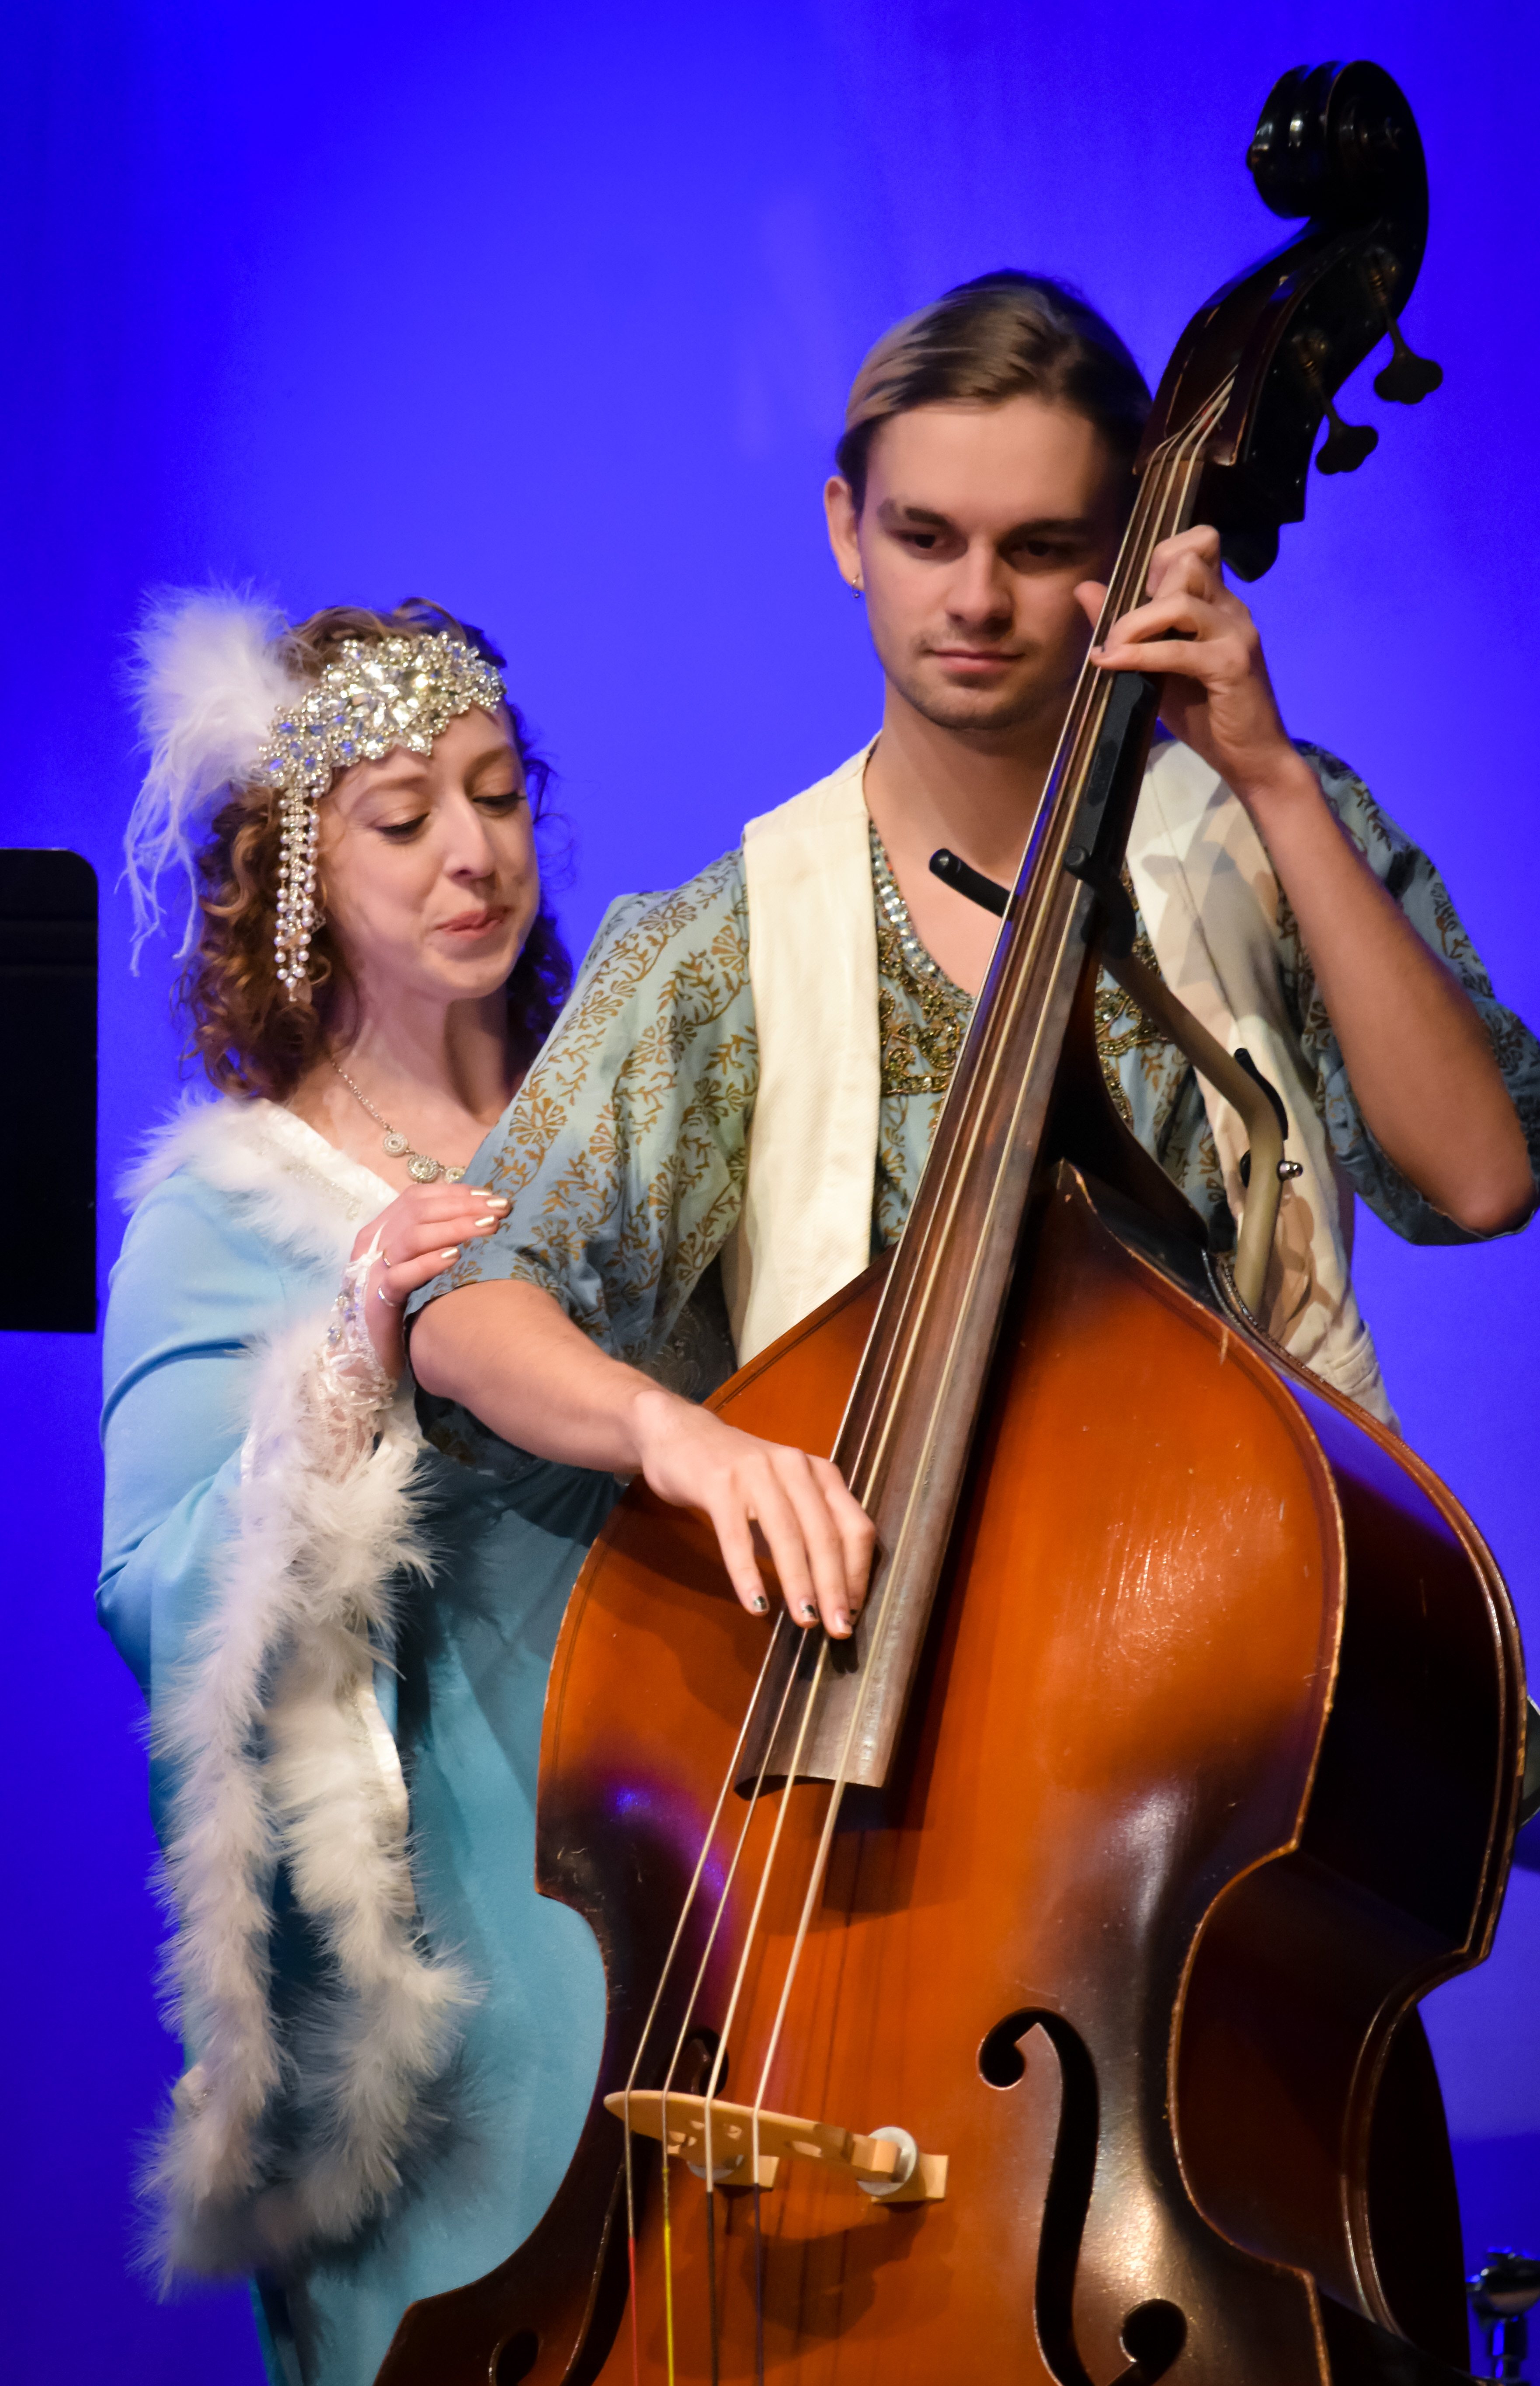 Kat Moraros and Mason Hawkes in 12th Night. Photo by Michelle Handley